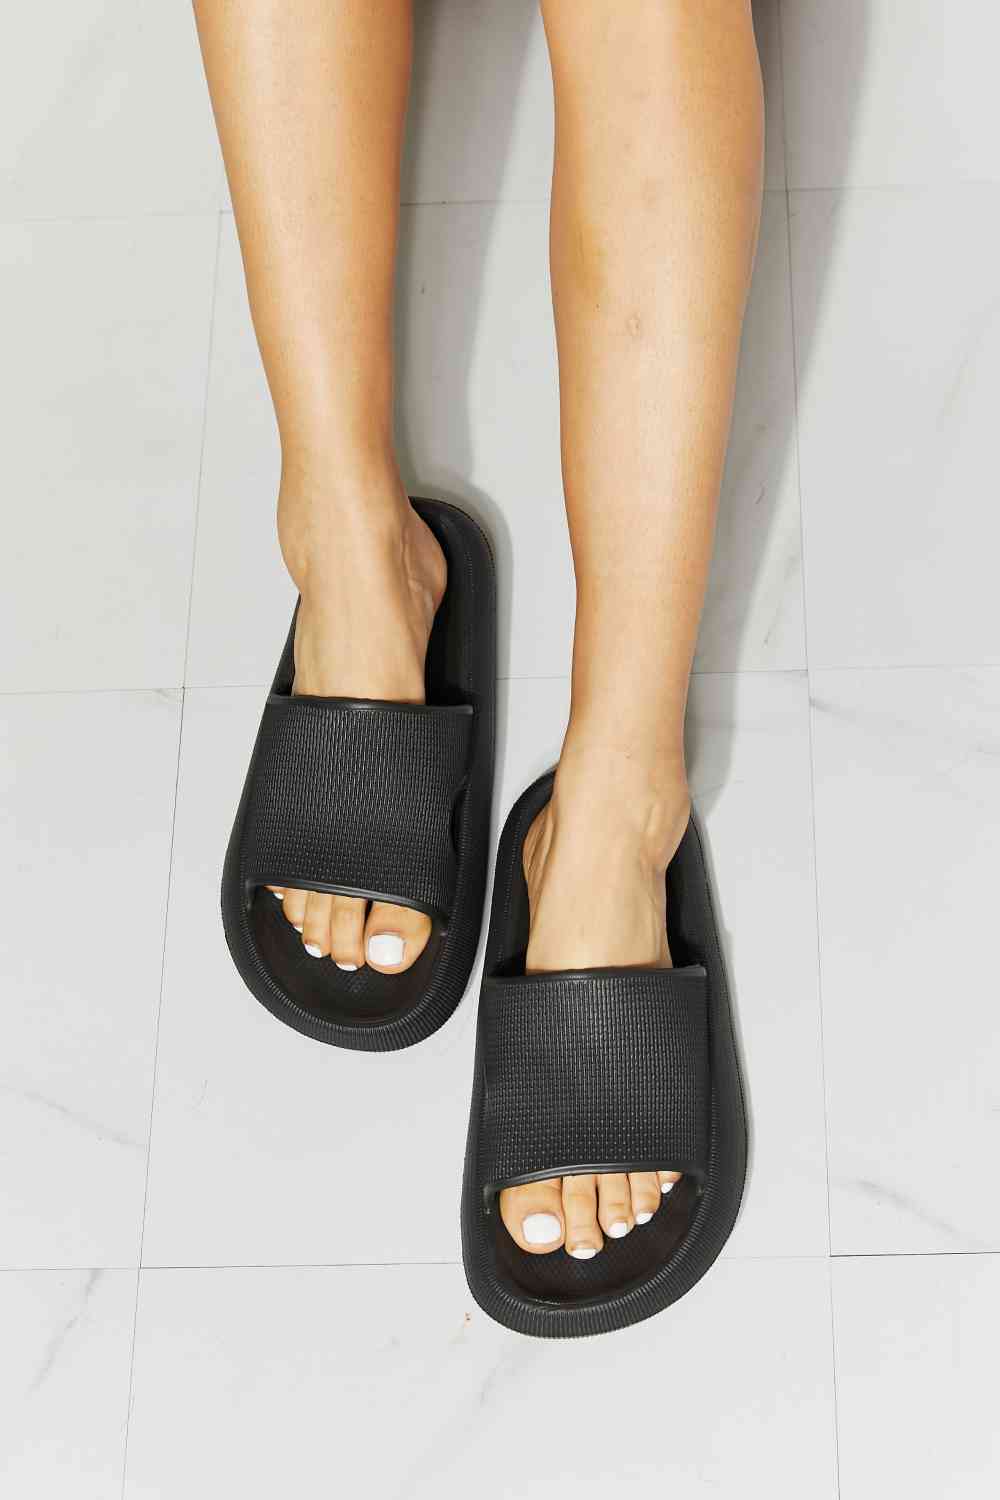 MMShoes Arms Around Me Open Toe Slide in Black Black